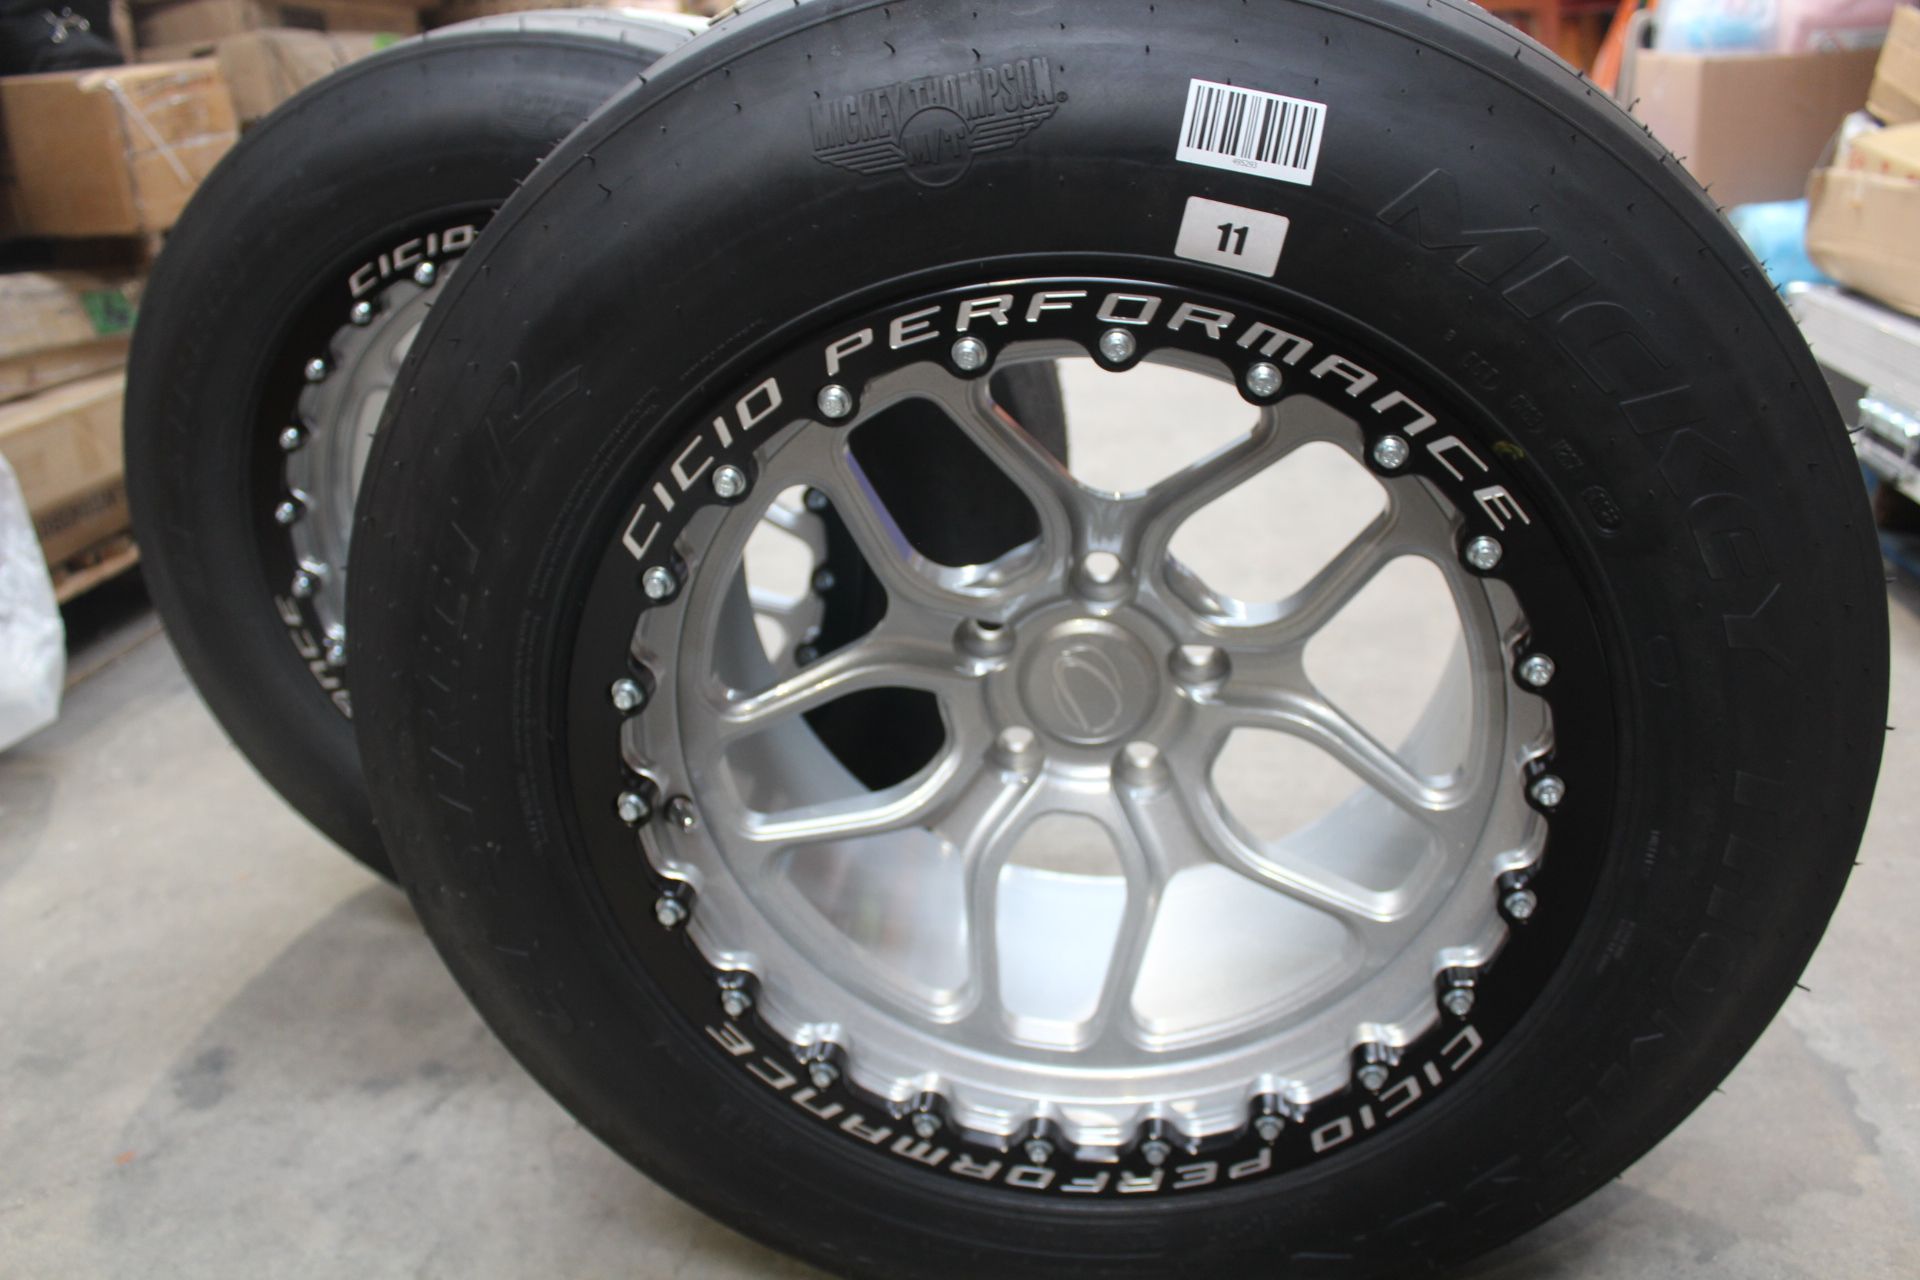 Two Cicio Performance Drag Wheels for a Nissan R35 GTR with Mickey Thompson E.T Street R Tyres. - Image 6 of 7